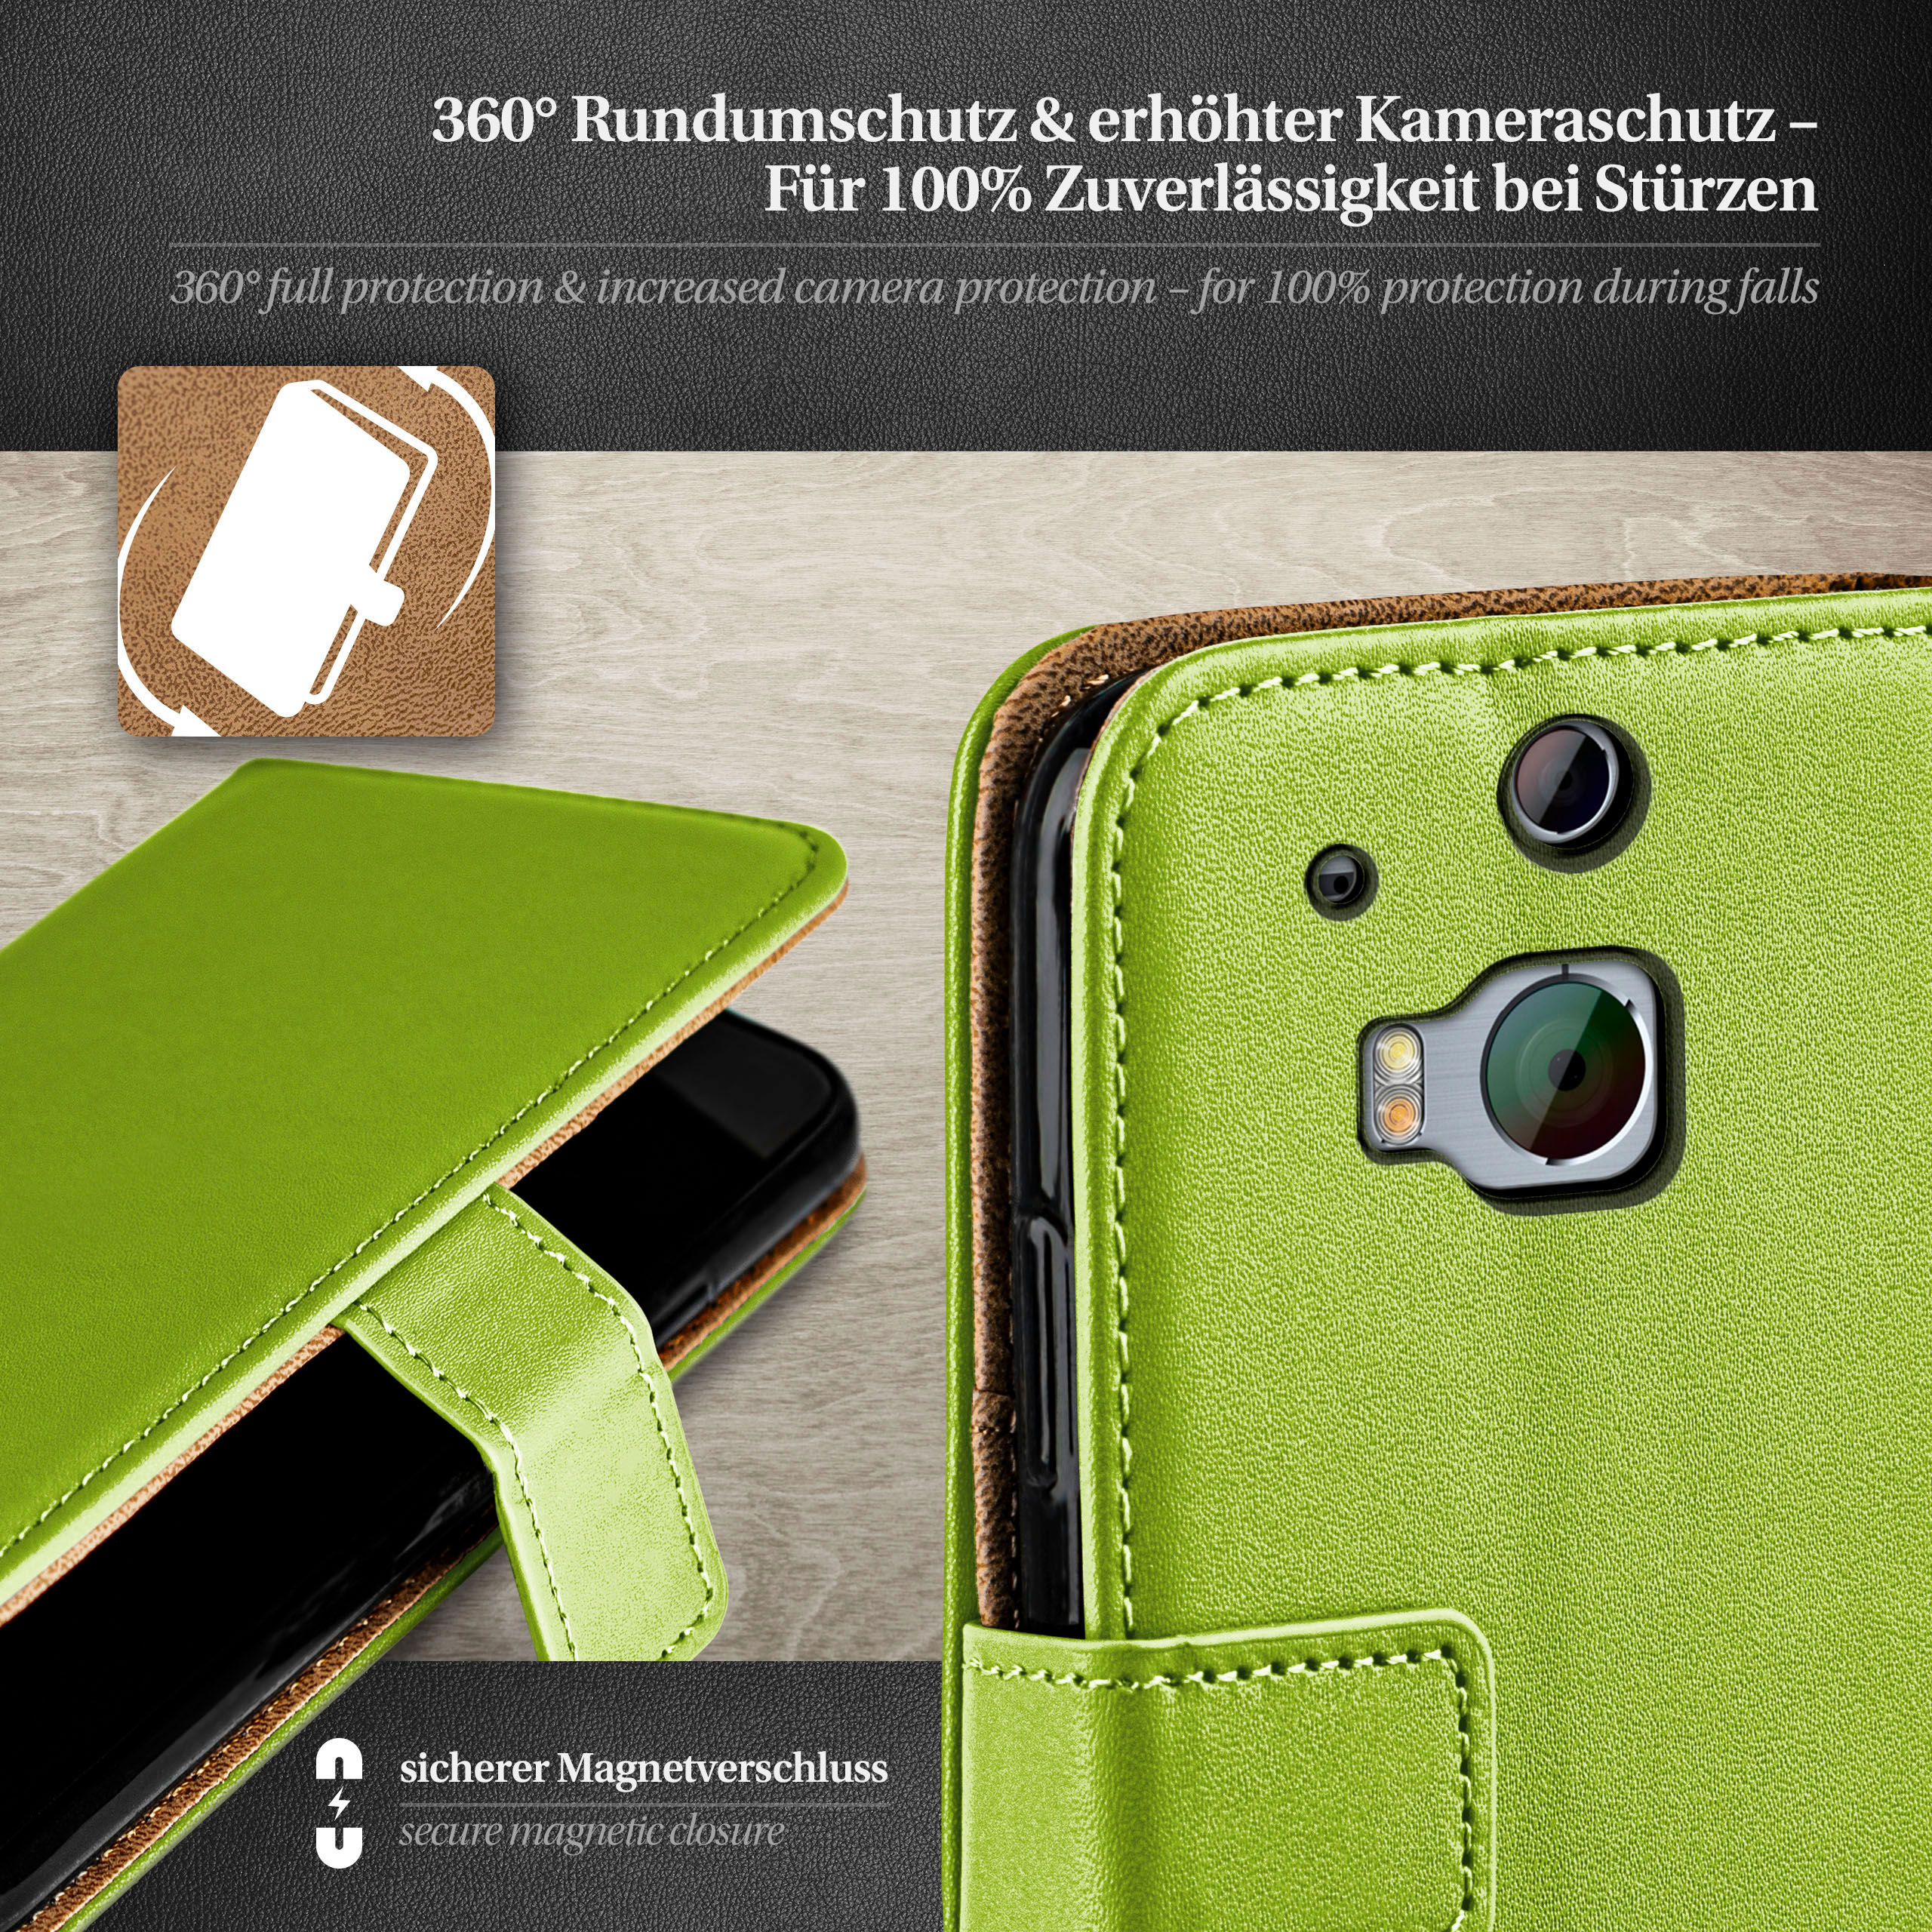 M8 Case, MOEX Bookcover, M8s, Lime-Green One Book / HTC,